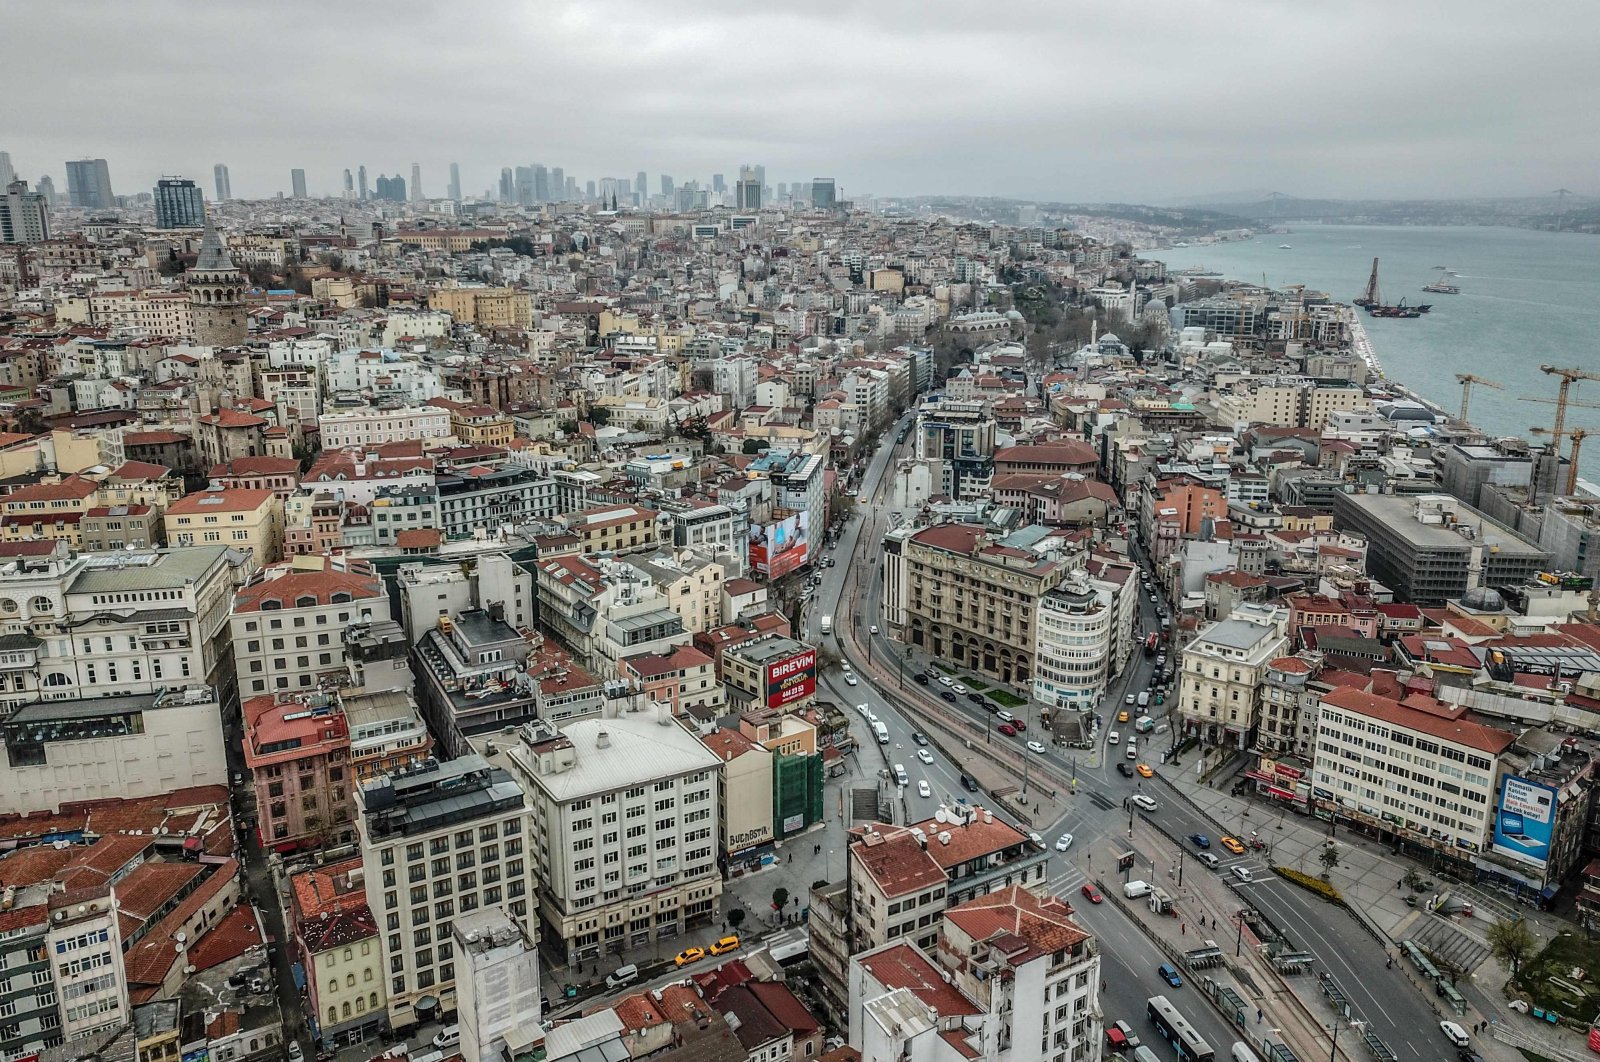 A view of the Karaköy district of central Istanbul, deserted due to the coronavirus outbreak, March 26, 2020. (AFP Photo)